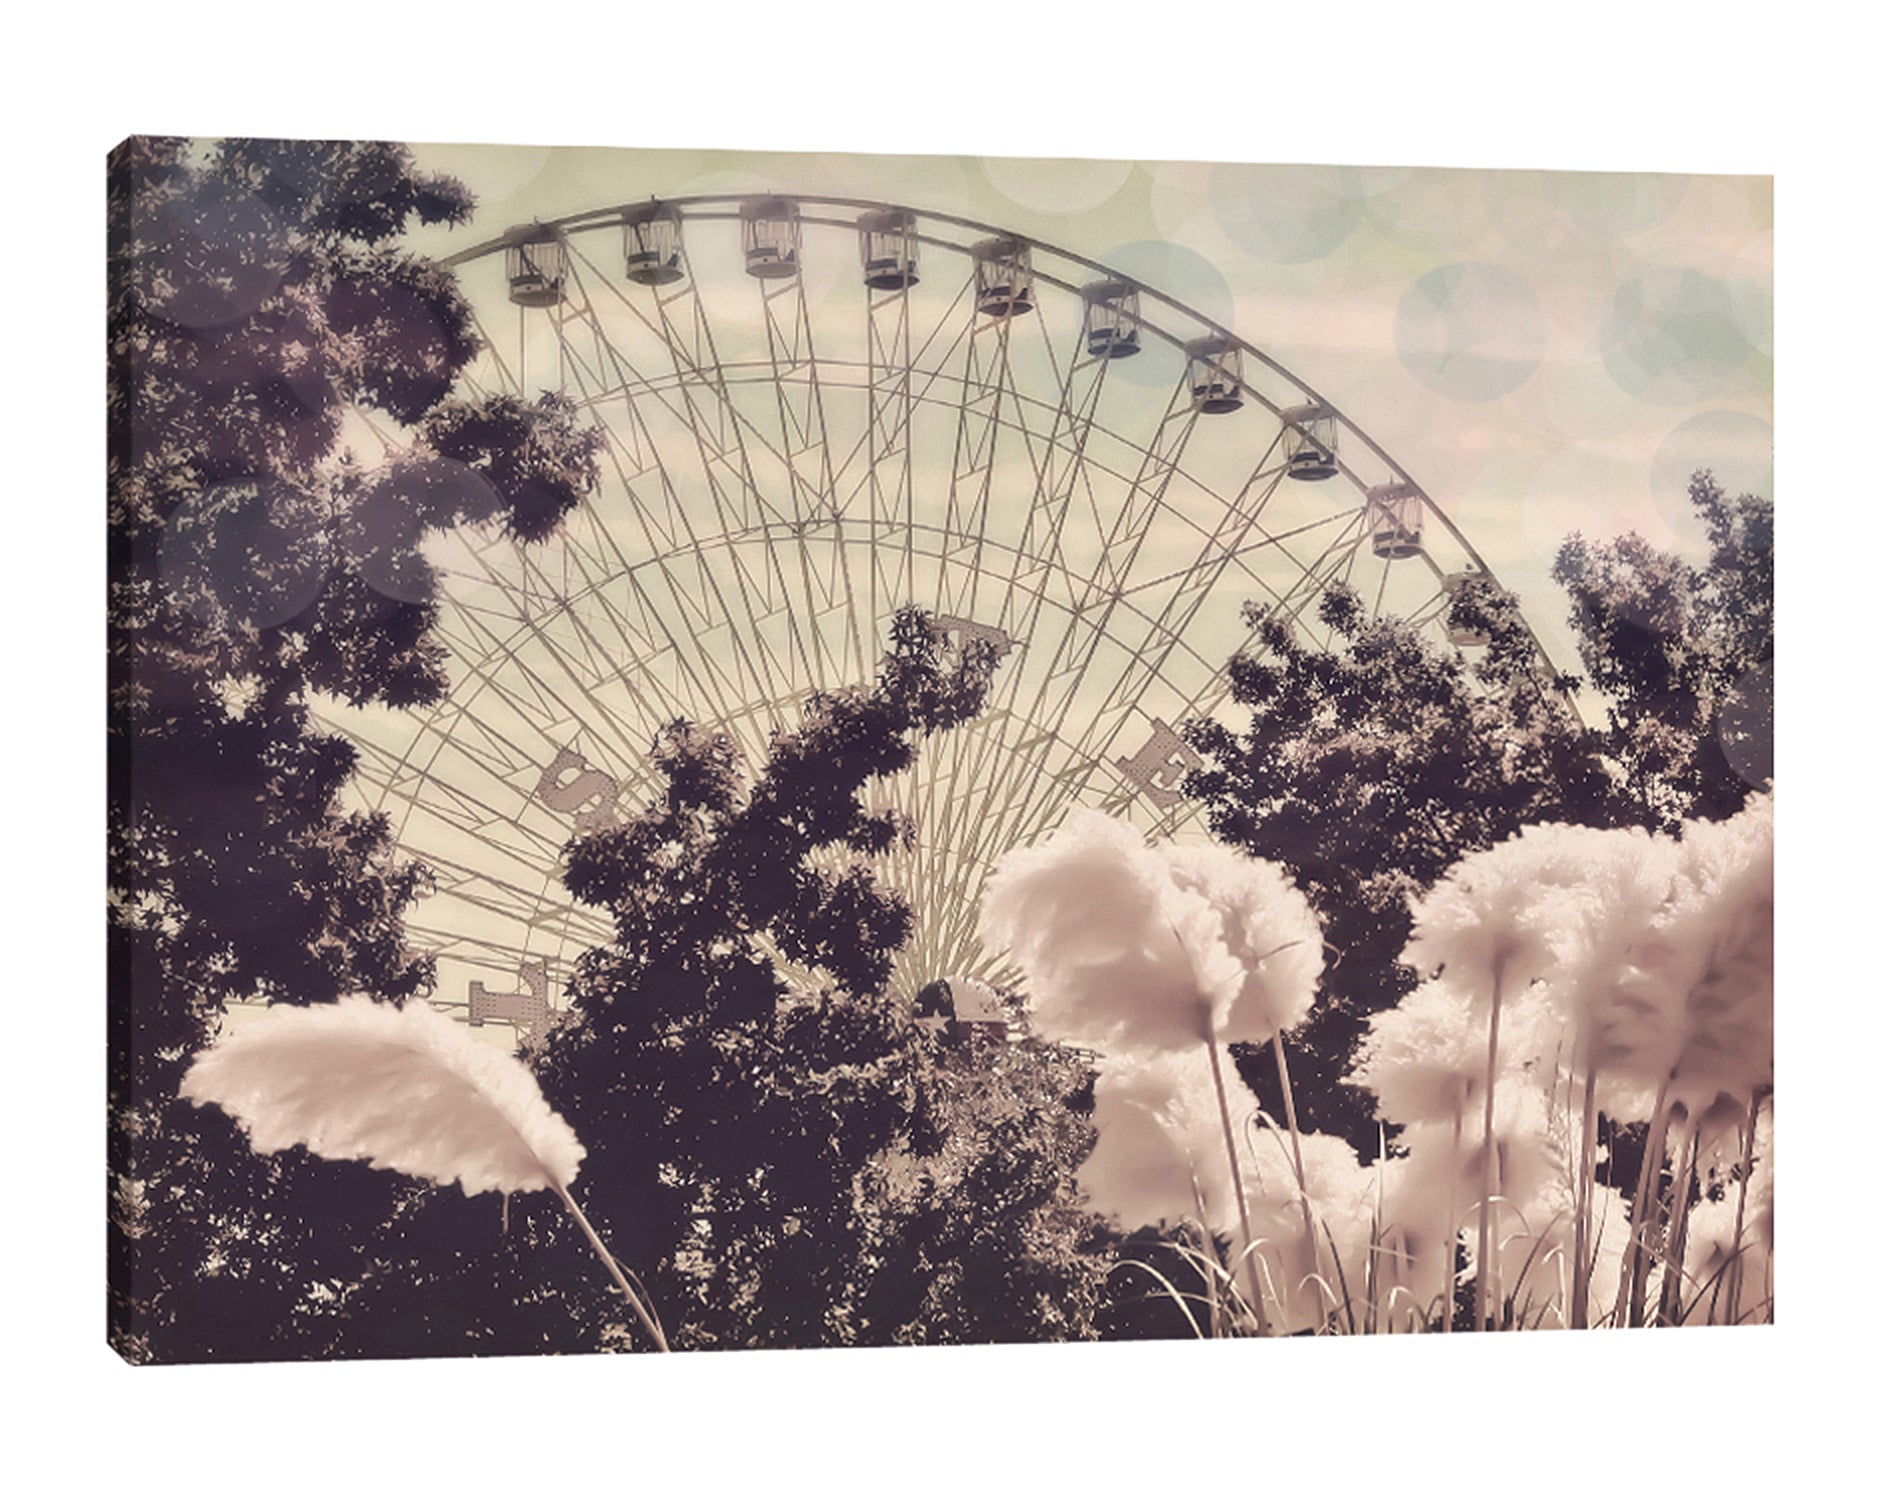 Ashley-Davis,Modern & Contemporary,Entertainment,Floral & Botanical,ferris wheel,carnival,carnival rides,trees,tree,feathers,skies,clouds,Charcoal Gray,Black,Mint Green,White,Gray